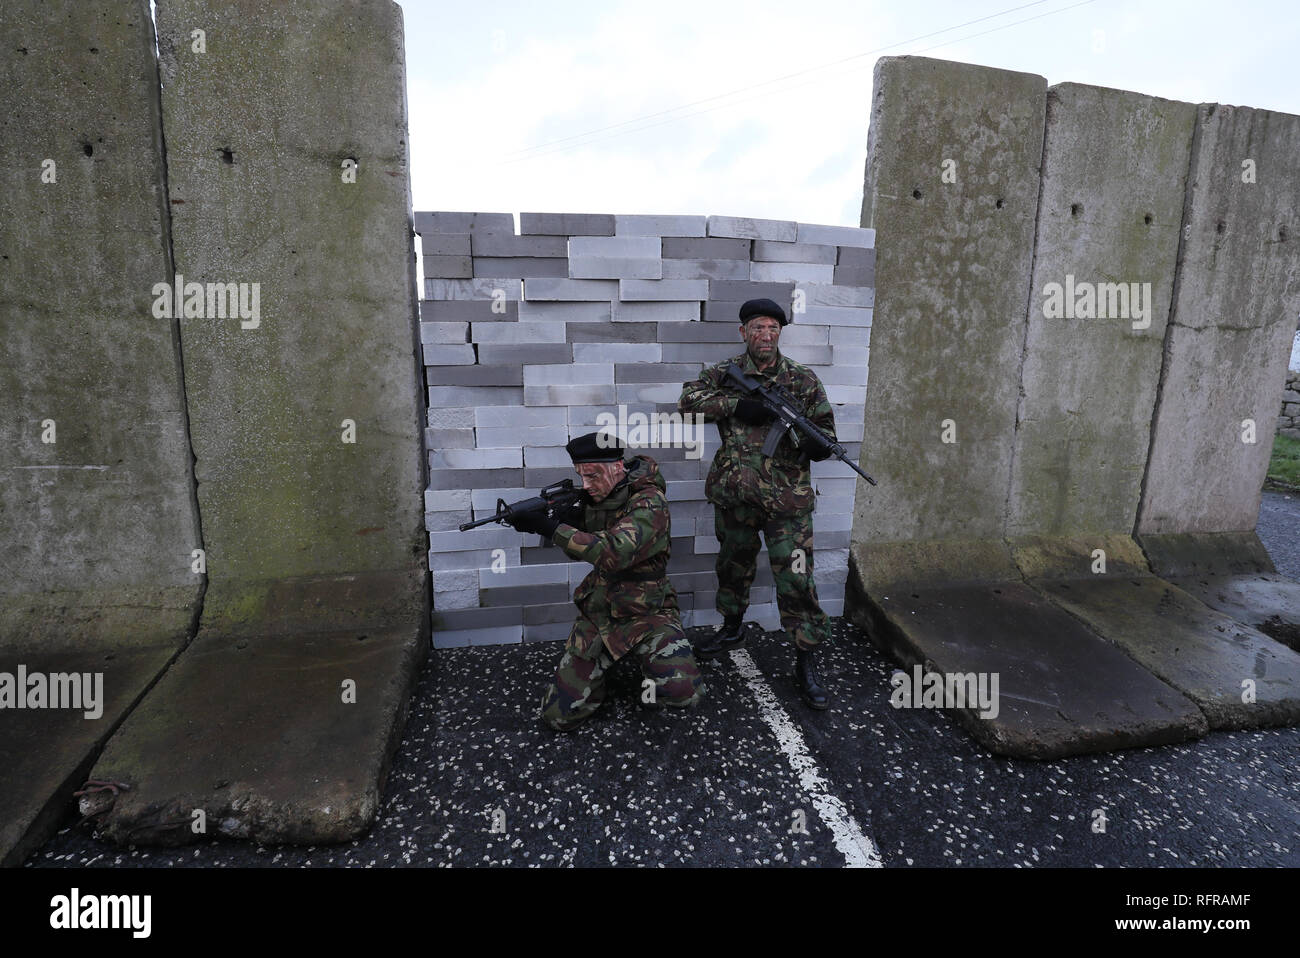 Actors in military fatigues take part in an anti-Brexit rally at the Irish border near Carrickcarnan, Co Louth, expressing their opposition to the imposition of a hard border between the Republic of Ireland and Northern Ireland. Stock Photo